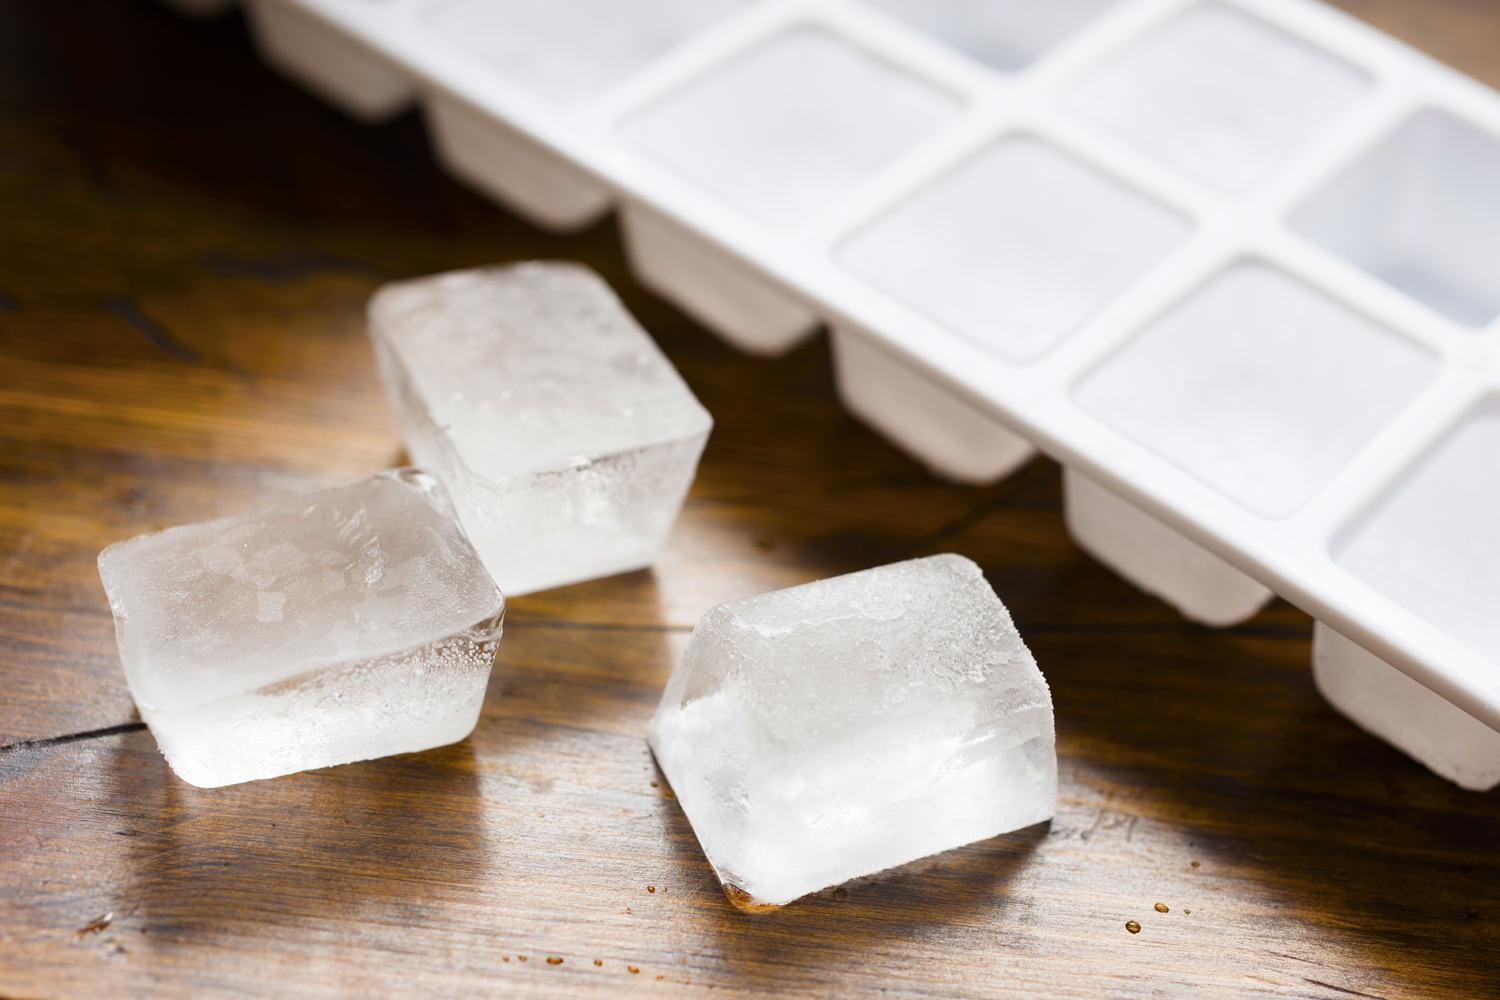 https://www.themanual.com/wp-content/uploads/sites/9/2021/02/best-ice-cube-trays-2021.jpg?p=1